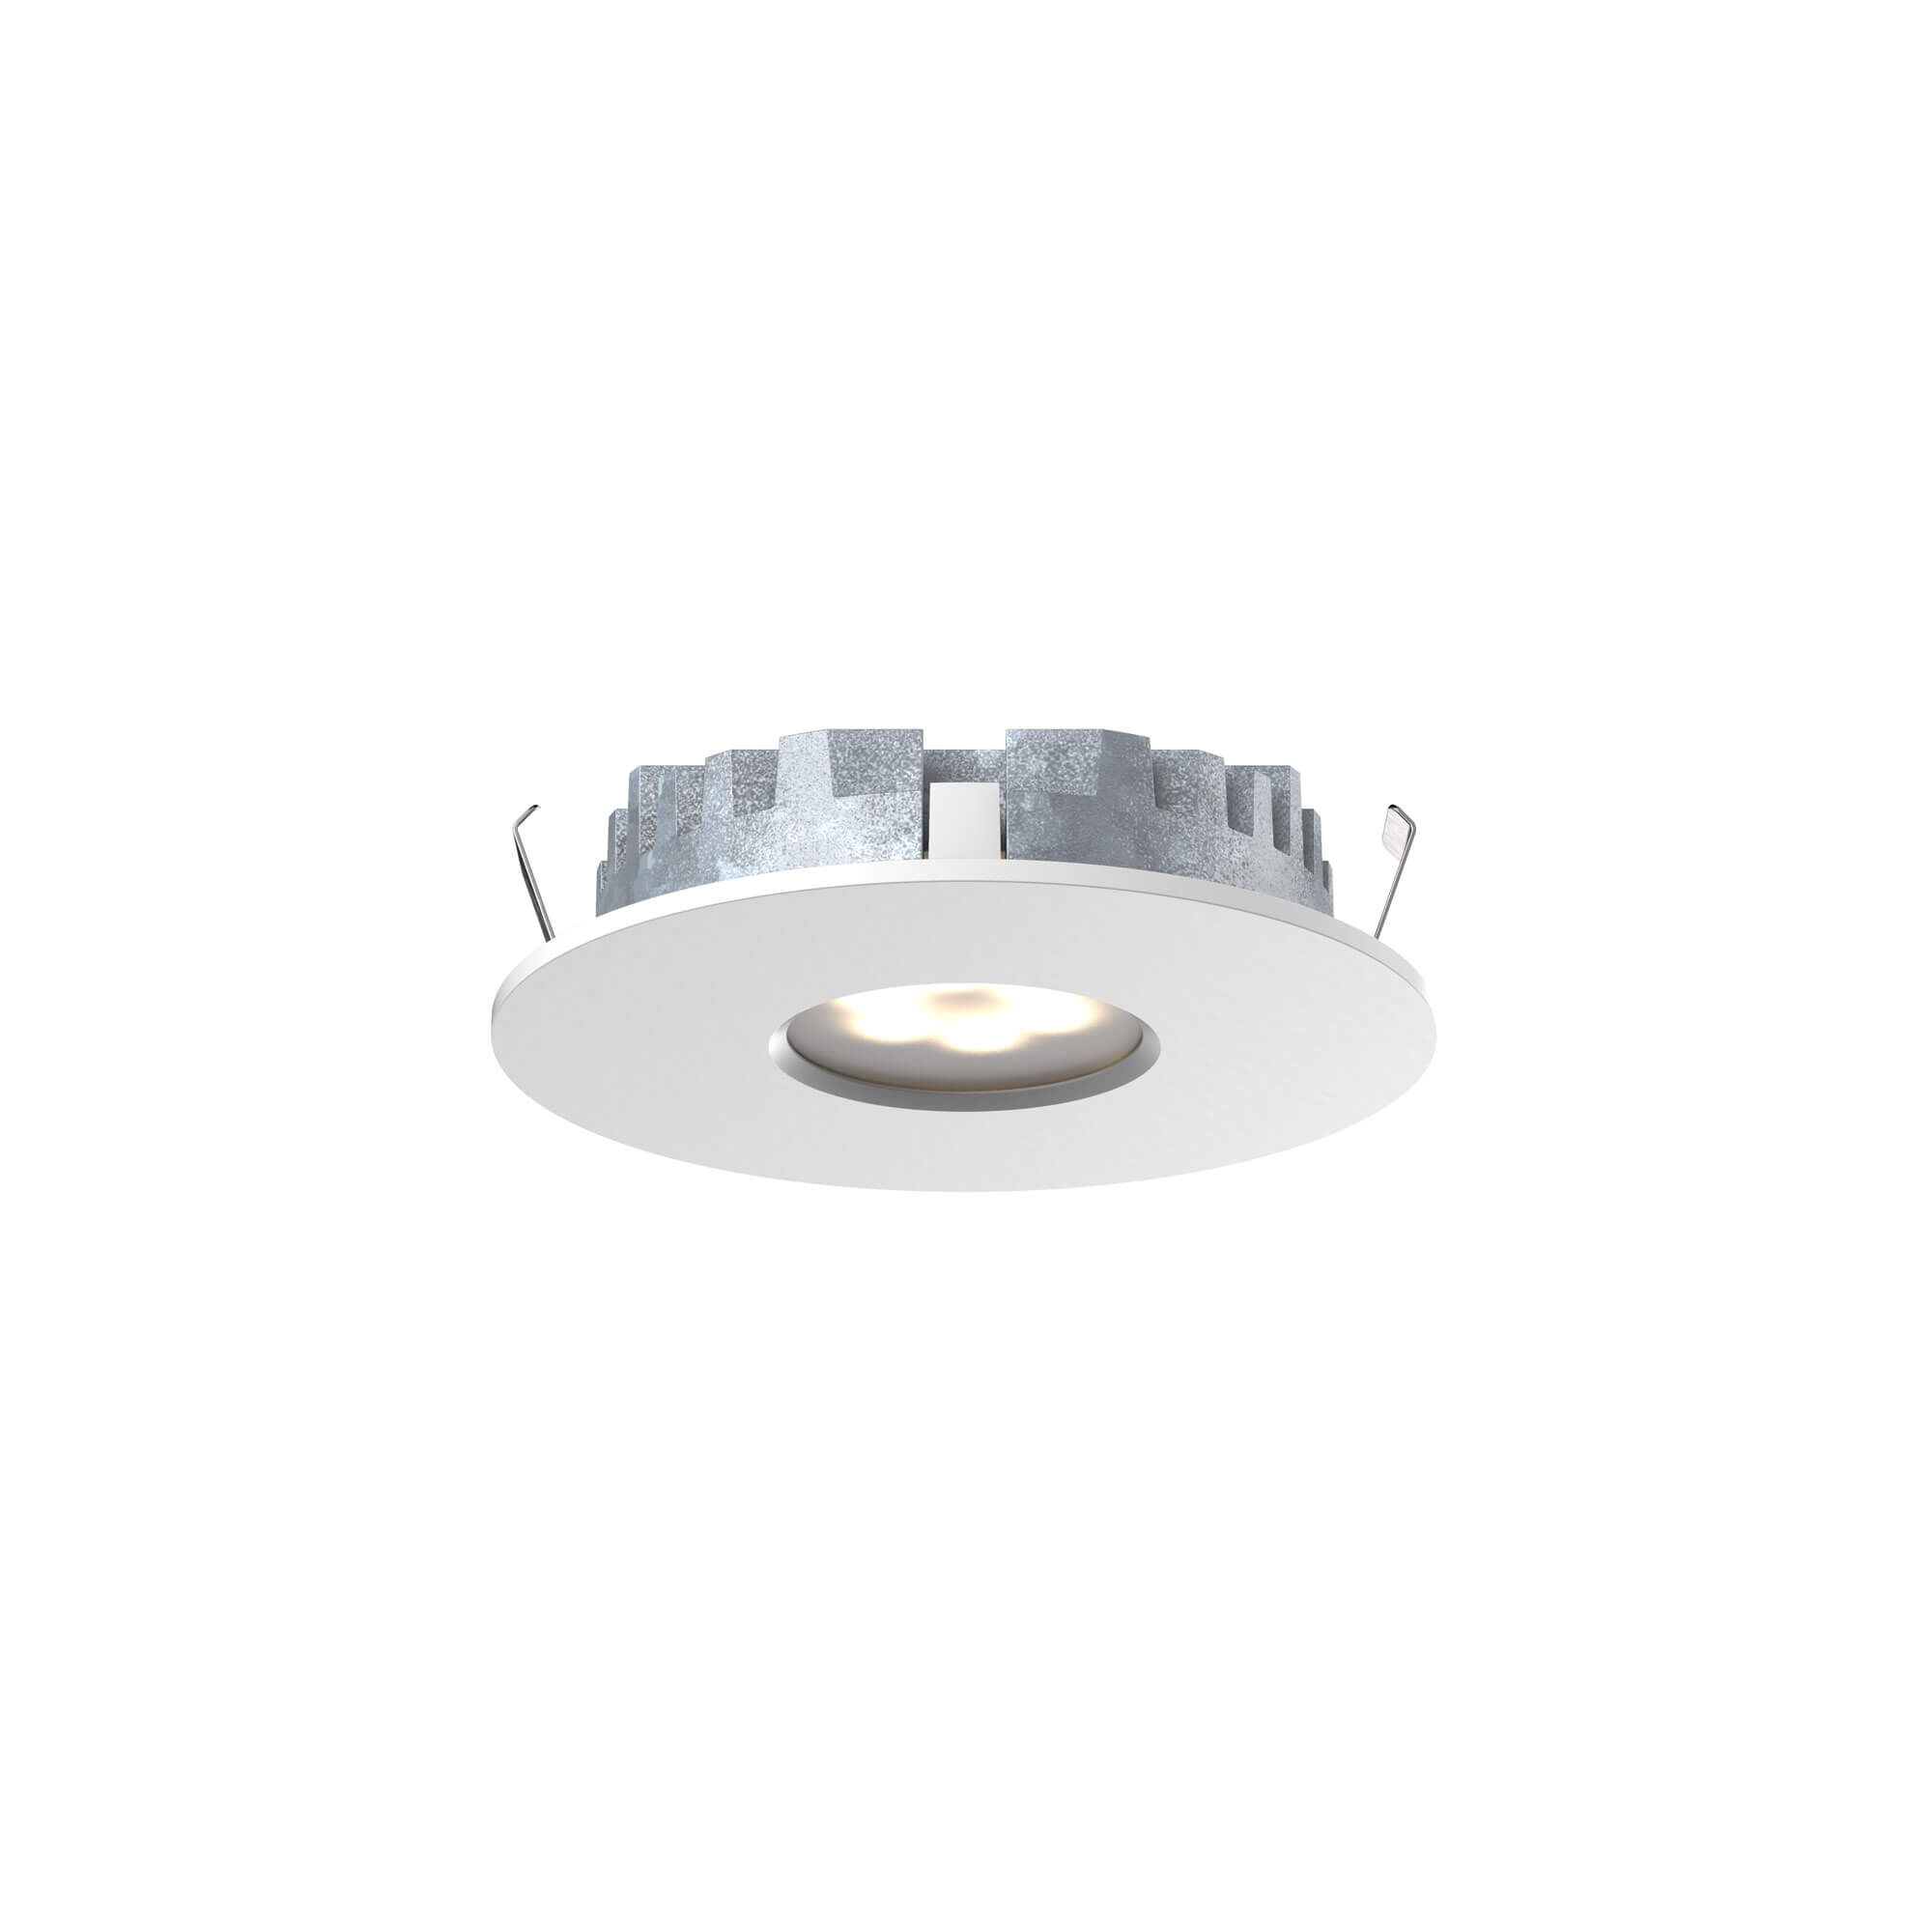 Pucks Products Dals Lighting